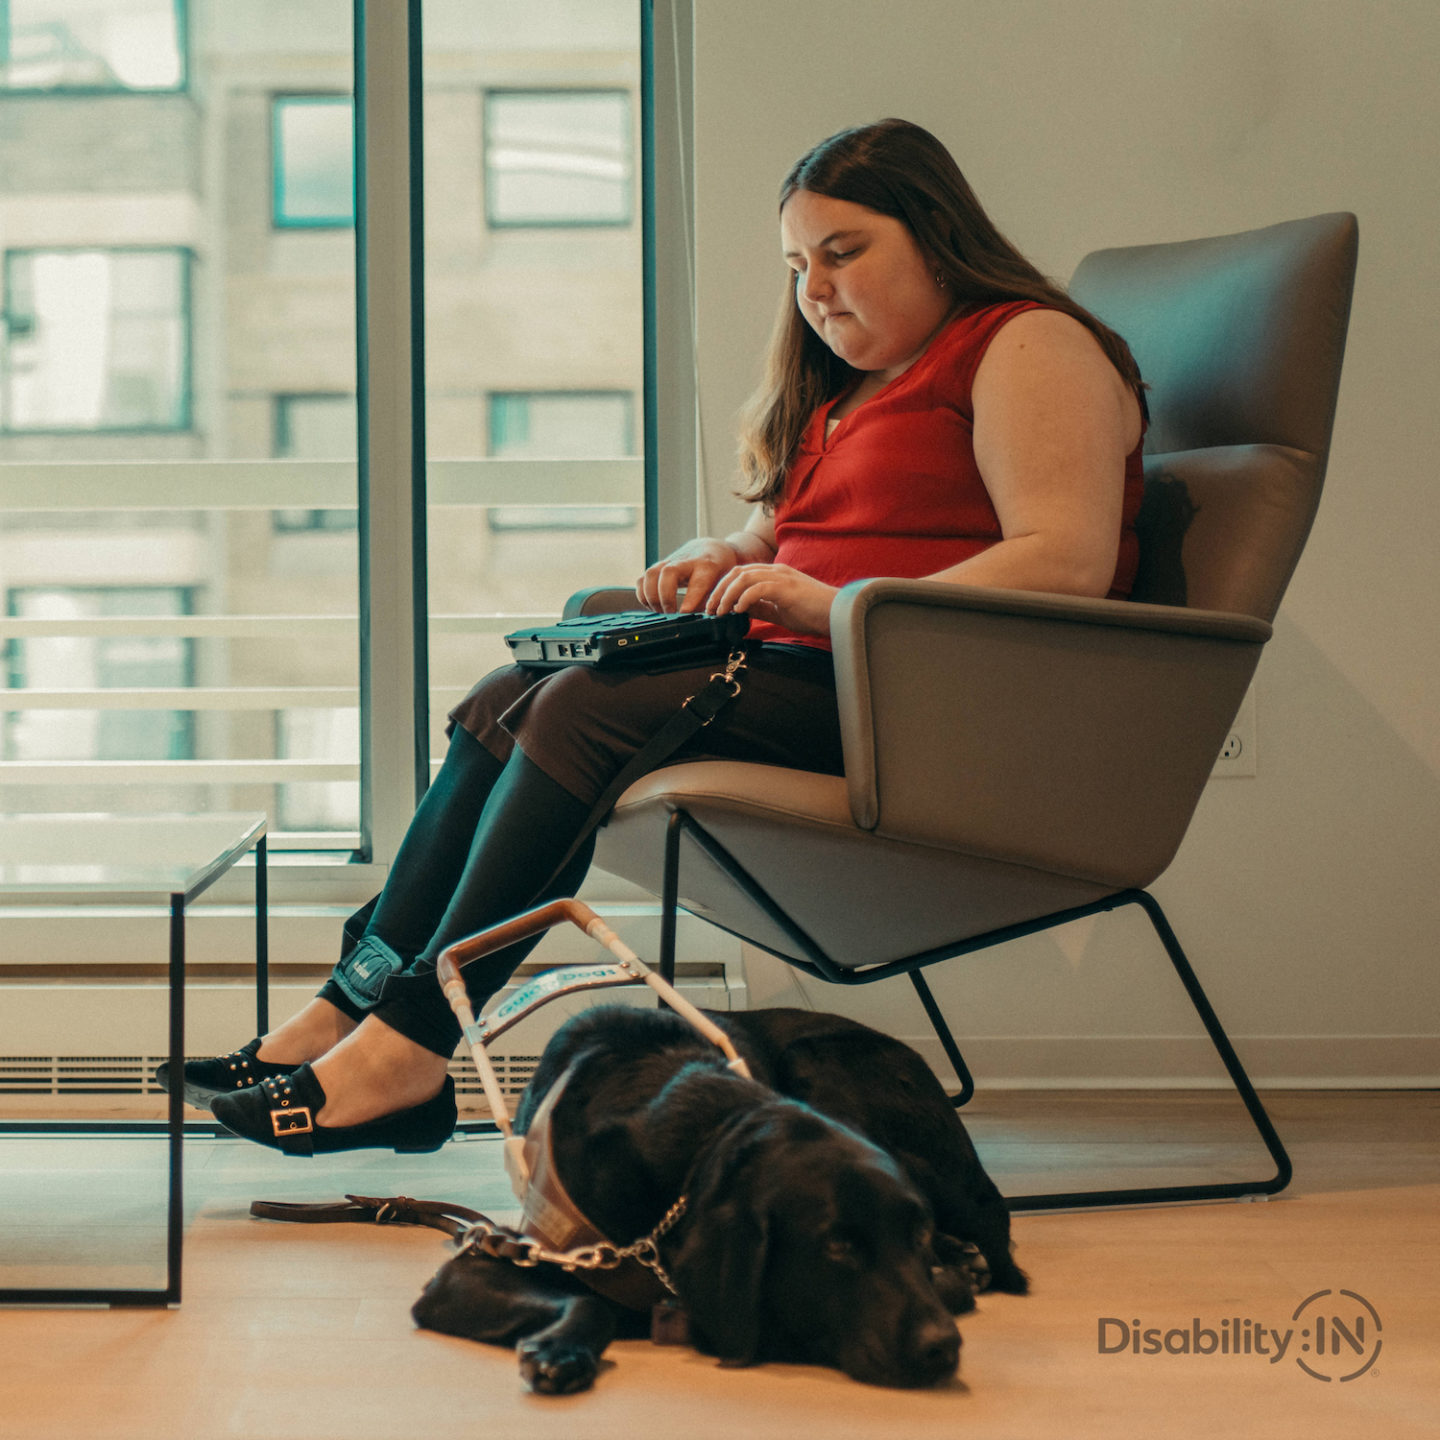 Woman sits on chair taking notes on braille notetaker. Guide dog sits on floor beside her.